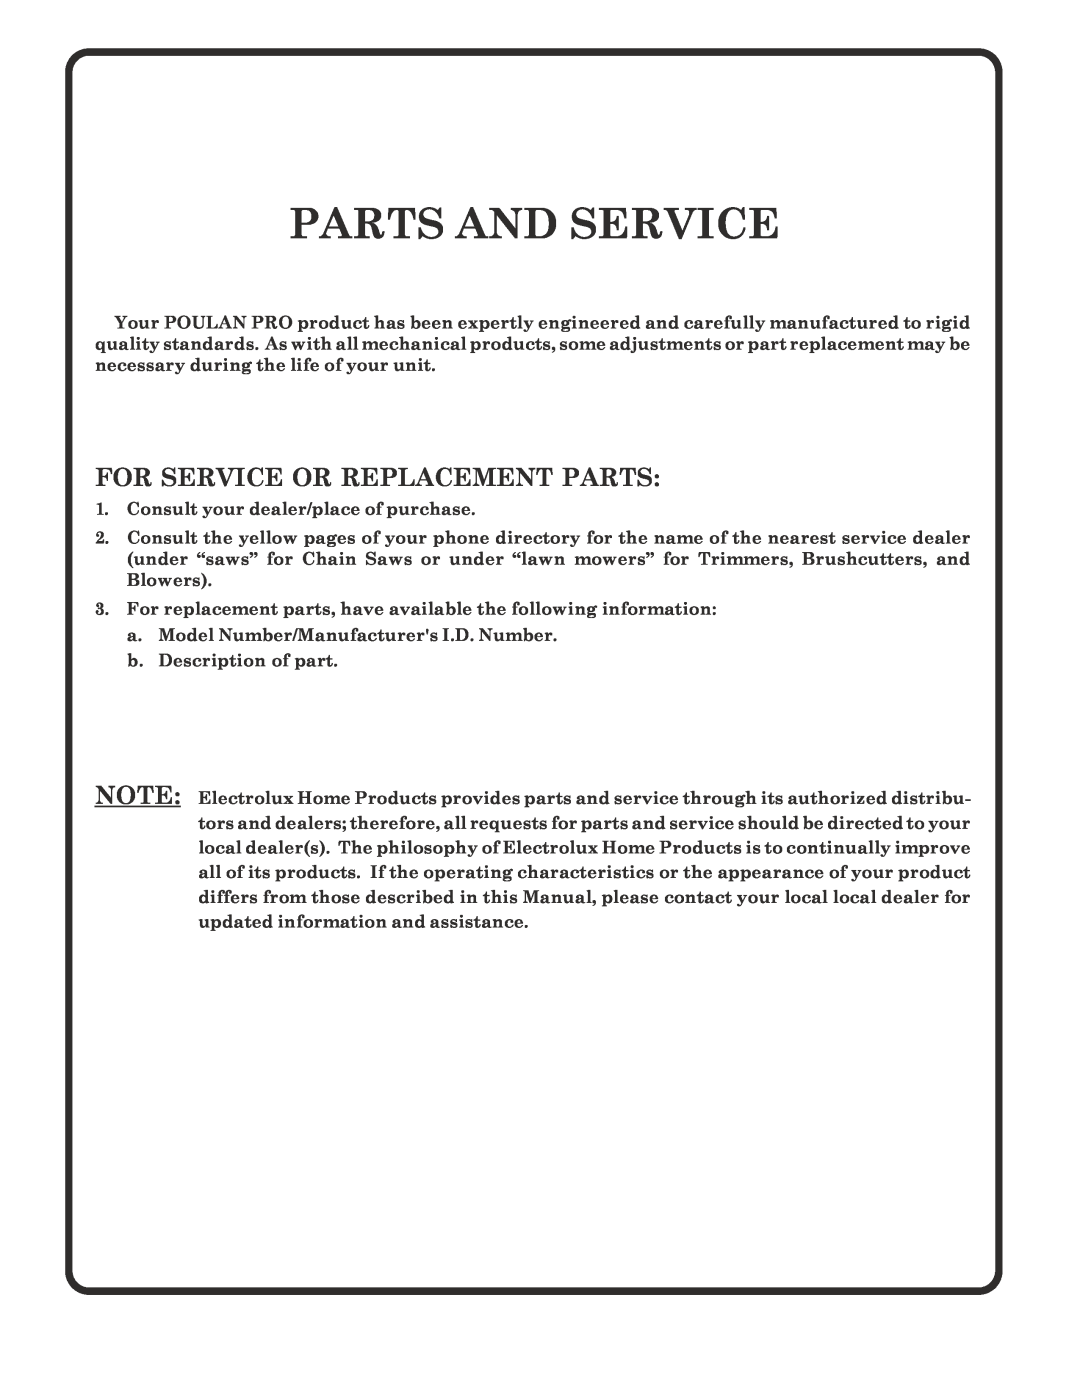 Poulan 181377 owner manual Parts And Service, For Service Or Replacement Parts 